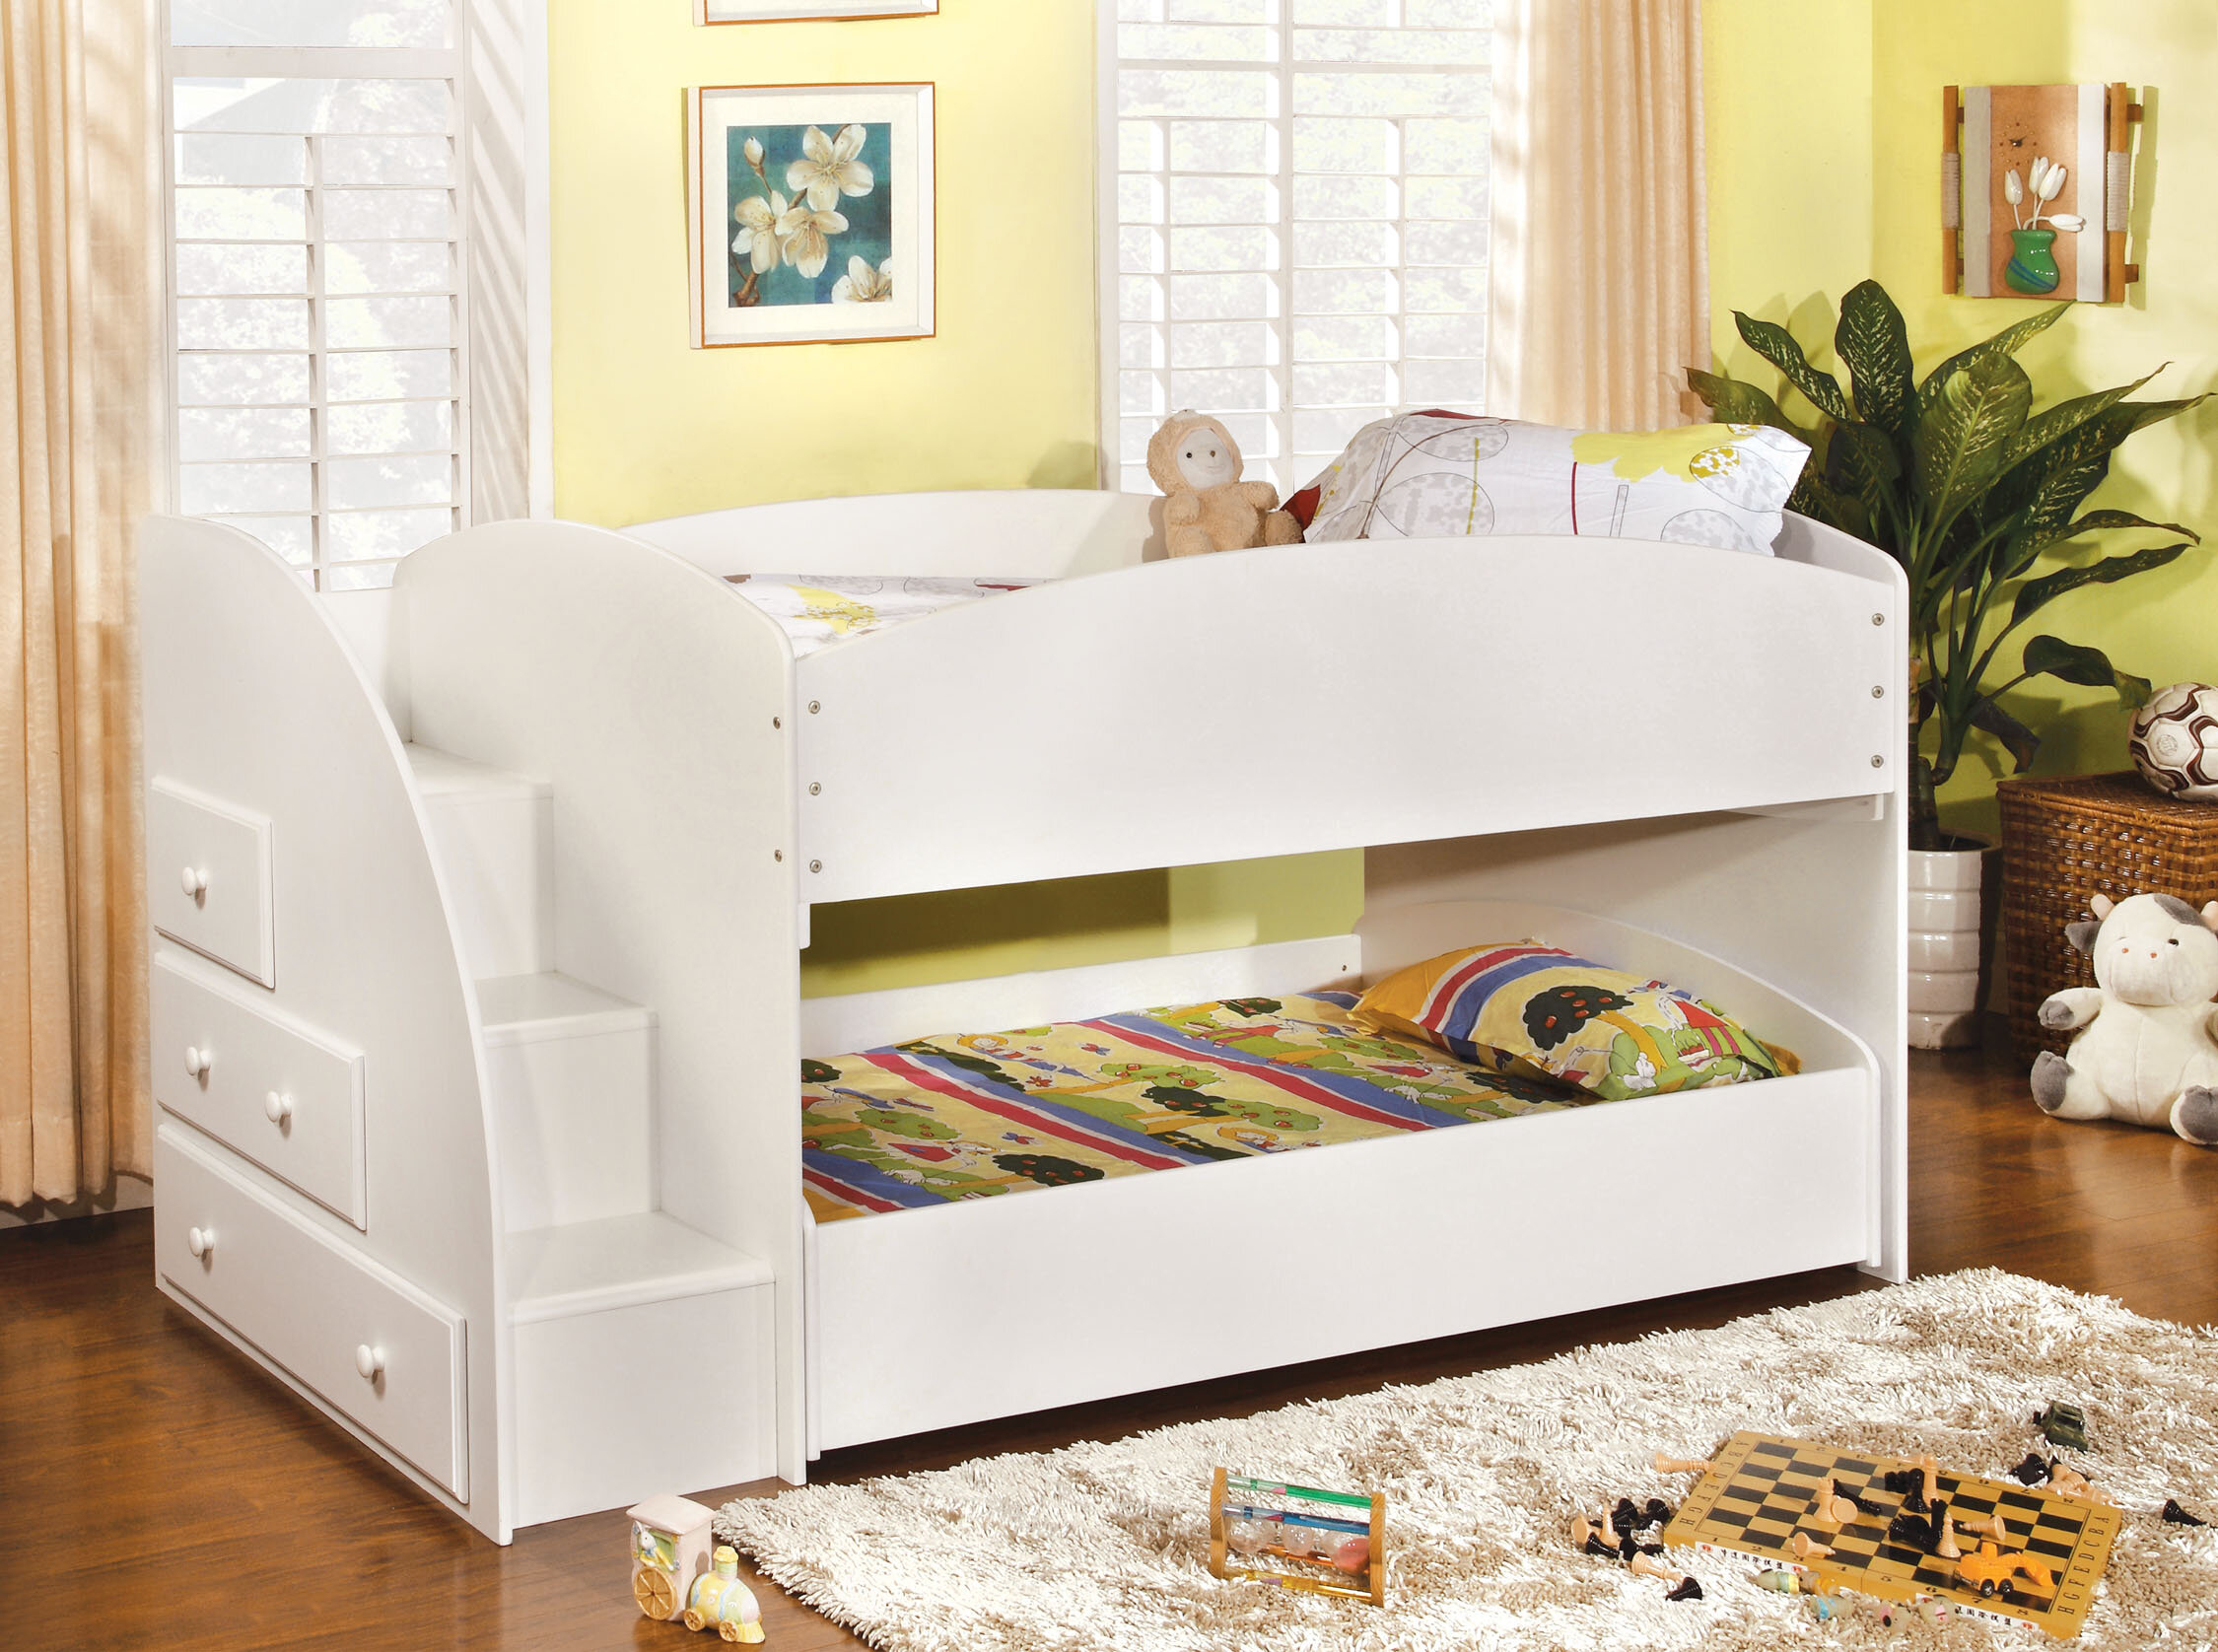 low bunk beds with storage